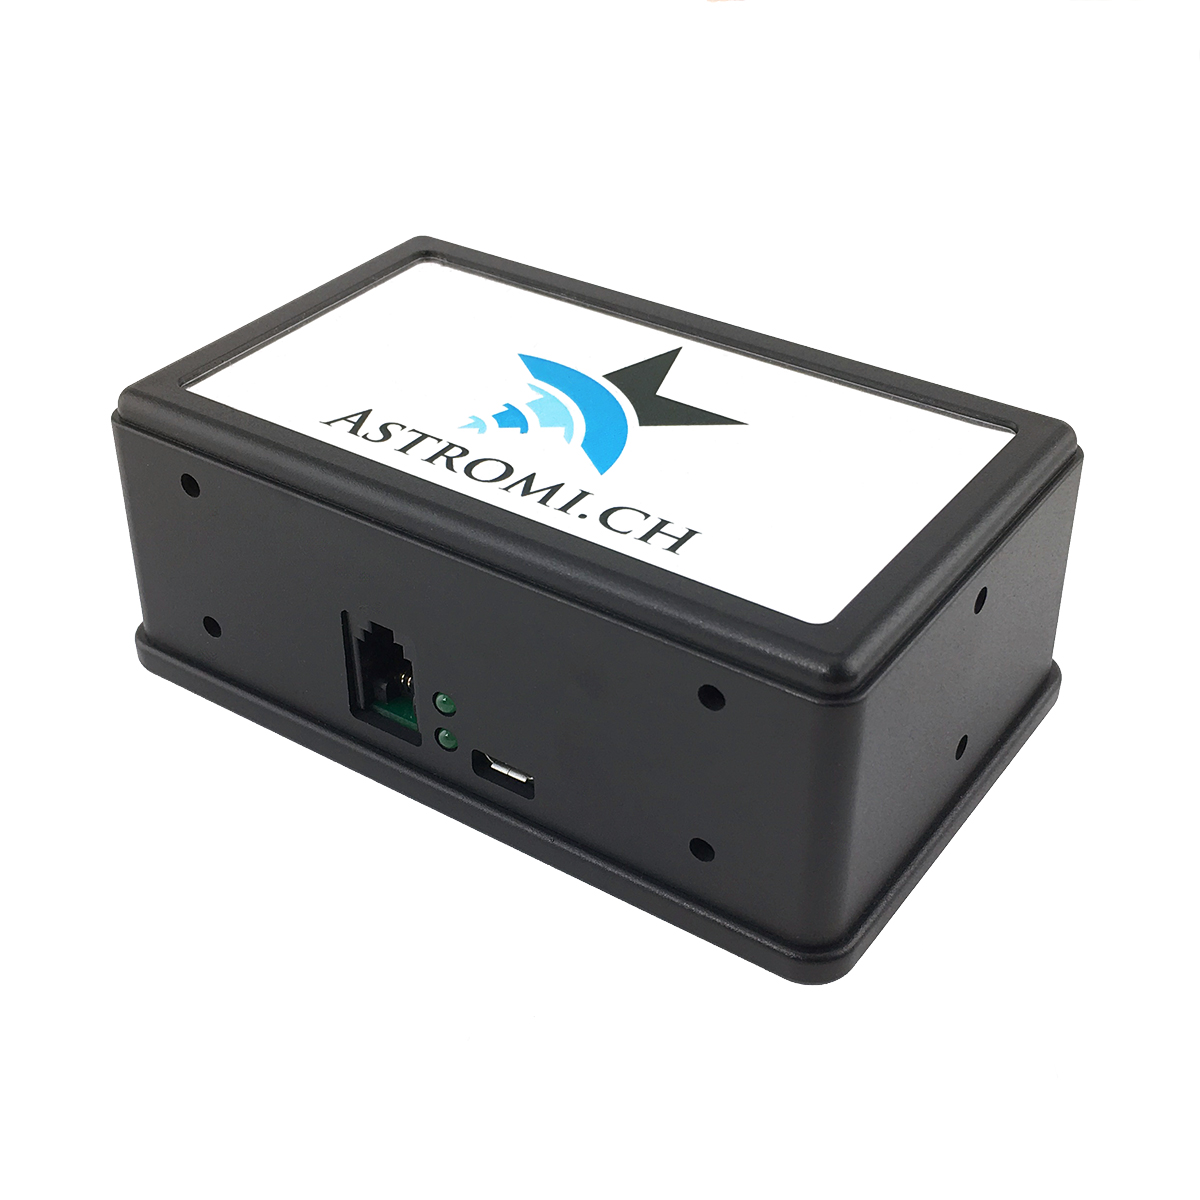 Astromi.ch MGBox V2 Meteostation USB Weather Station with GPS